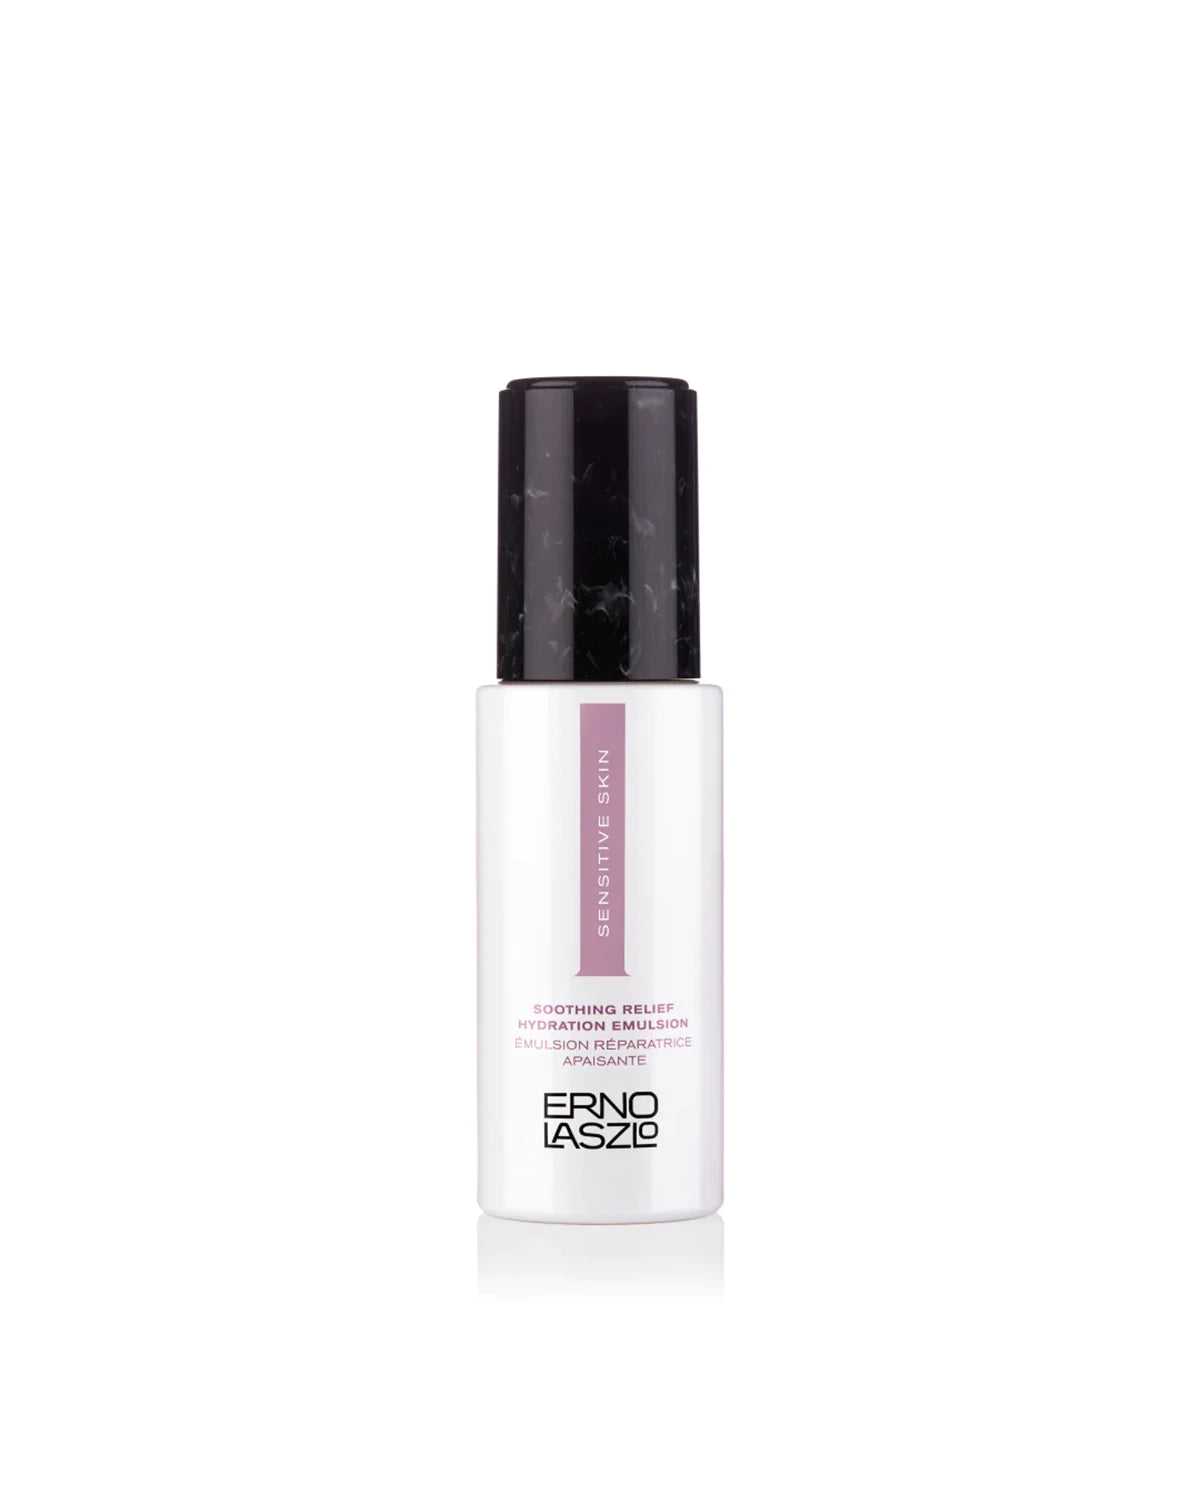 ERNO LASZLO - SOOTHING RELIEF HYDRATION EMULSION